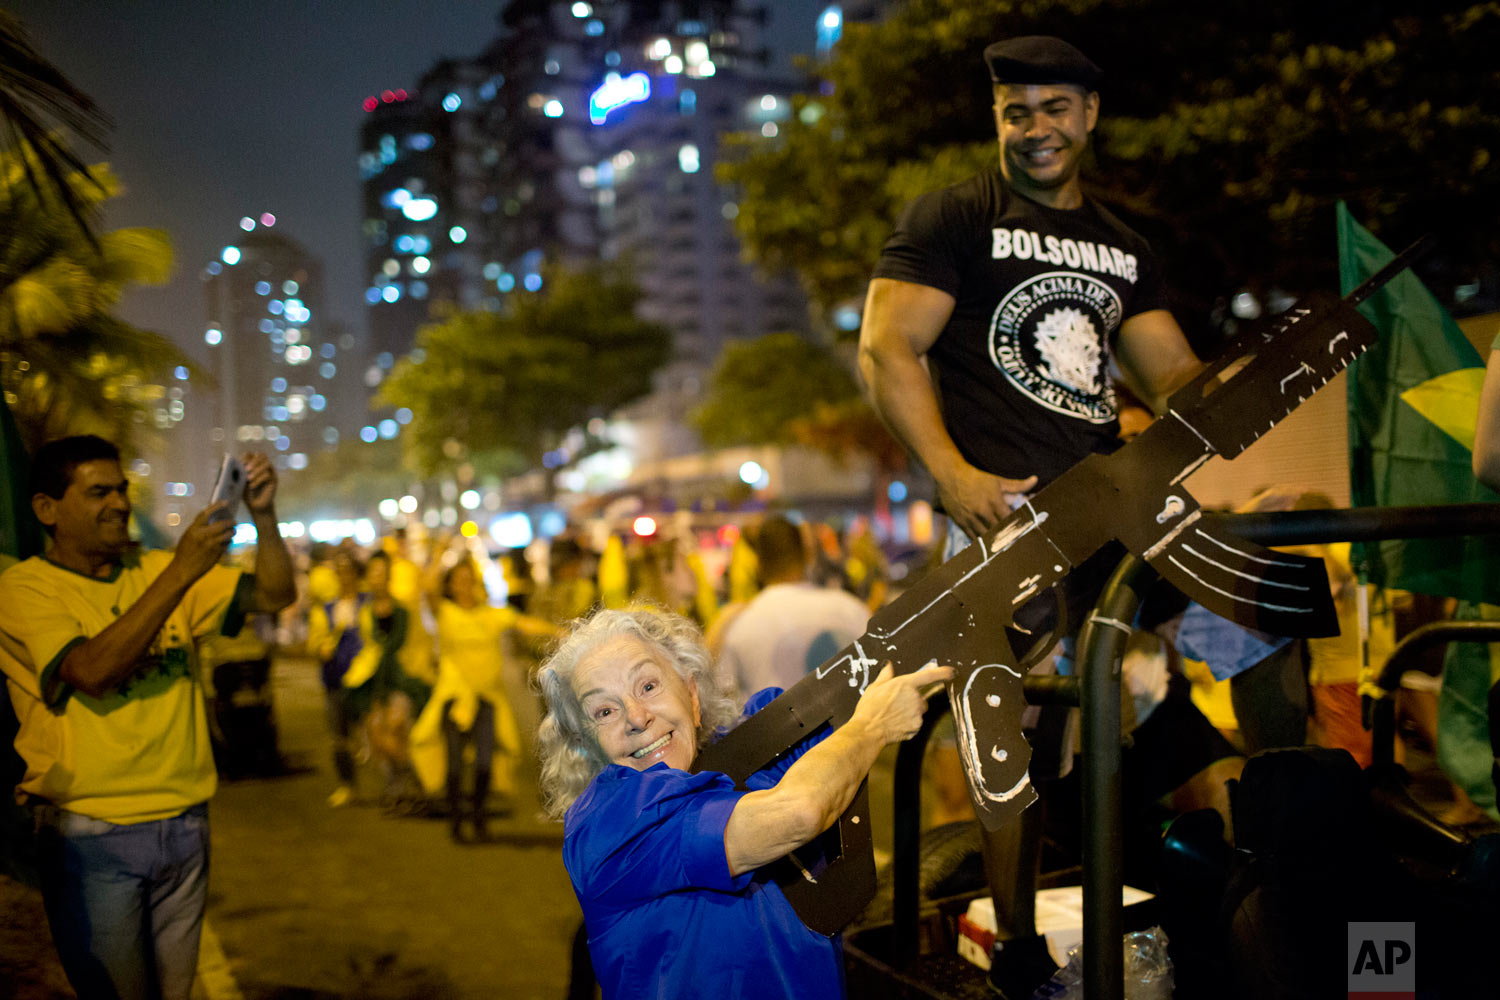  A supporter of presidential candidate Jair Bolsonaro poses for a photo with an oversized, fake rifle, as she celebrates the election runoff results in Rio de Janeiro, Brazil, Oct. 28, 2018. Brazil’s Supreme Electoral Tribunal declared the right-lean